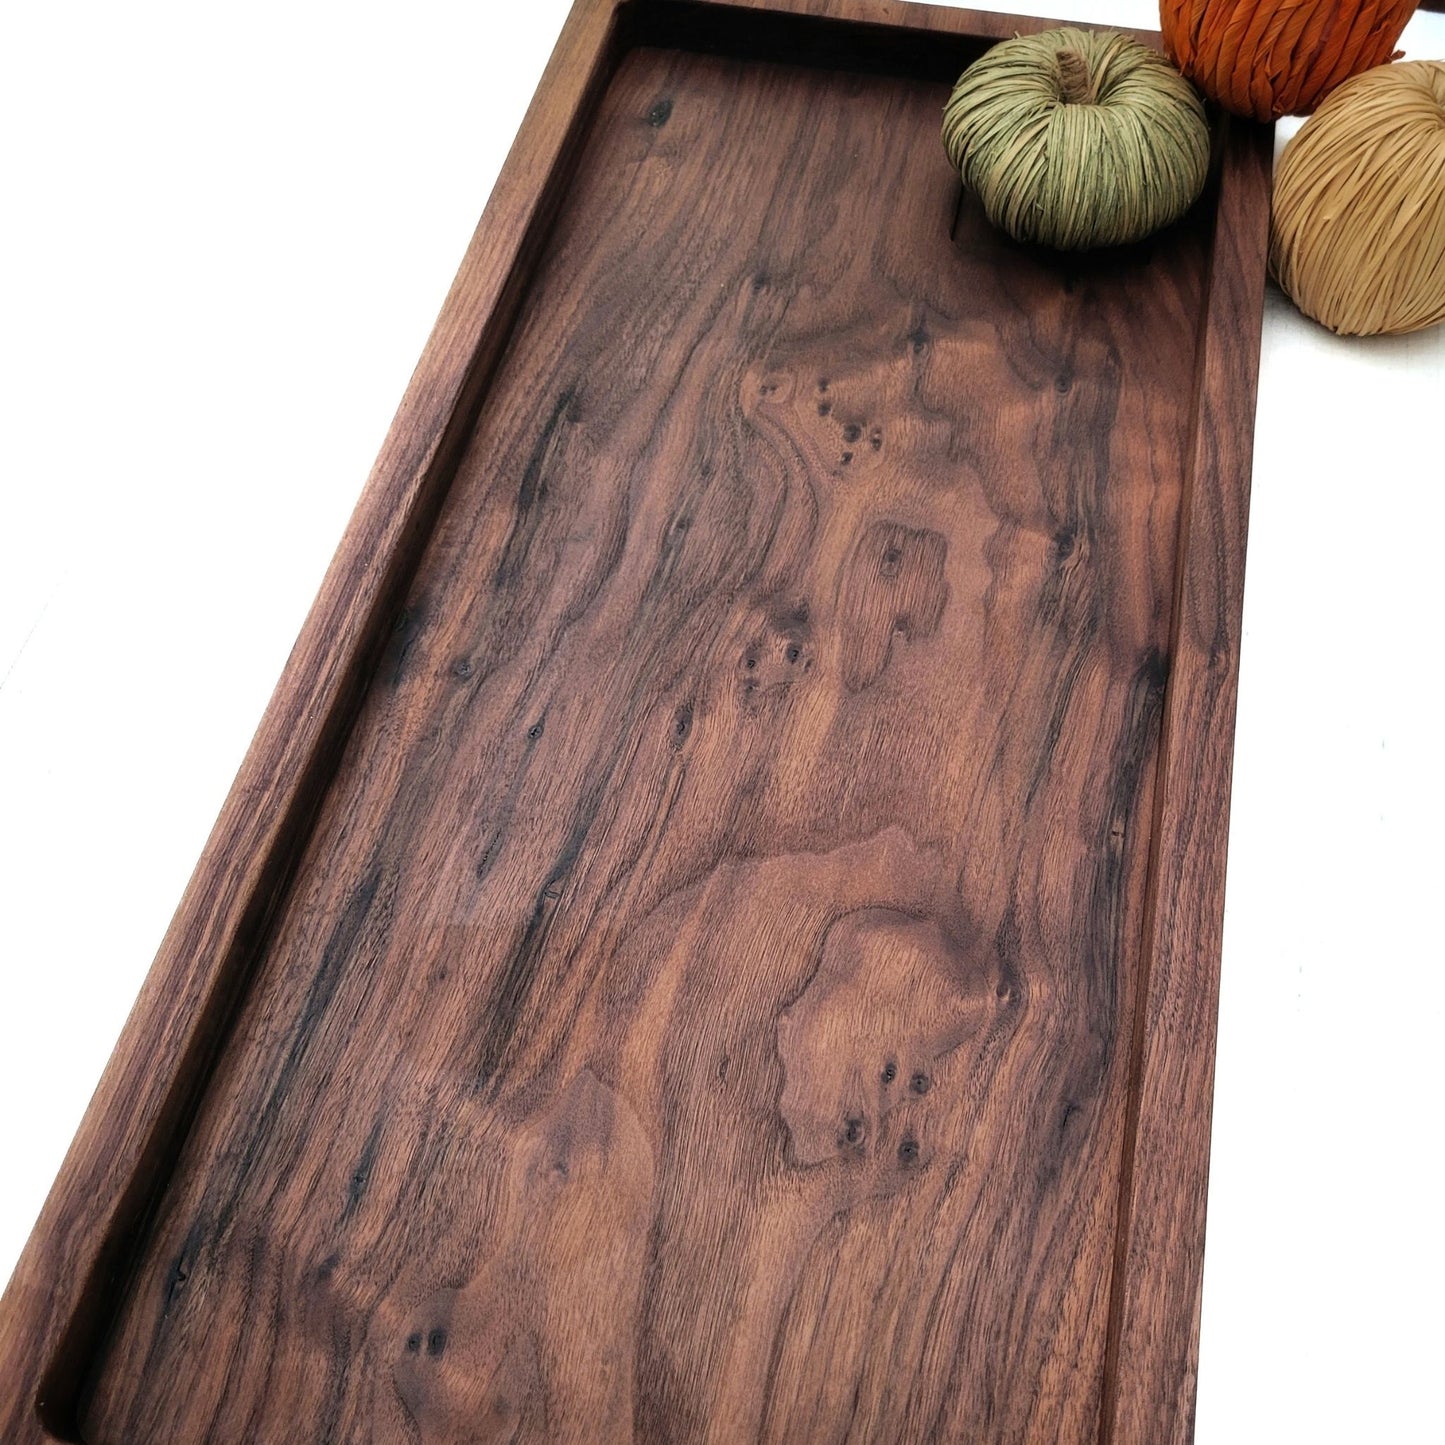 charcuterie board, personalized as a closing gift